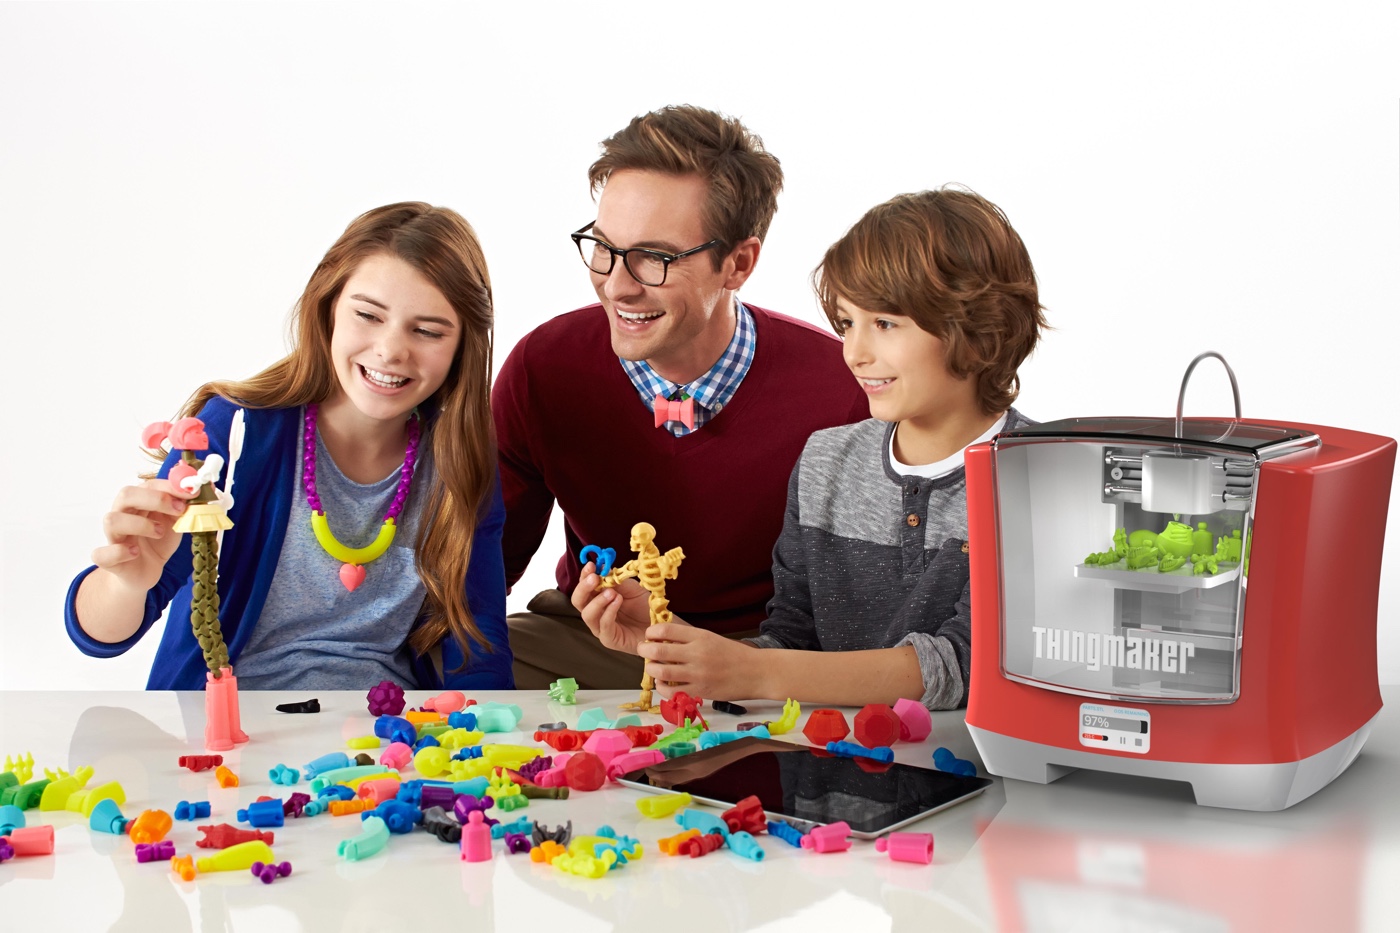 Mattel&#039;s new ThingMaker is a $300 3D printer for toys